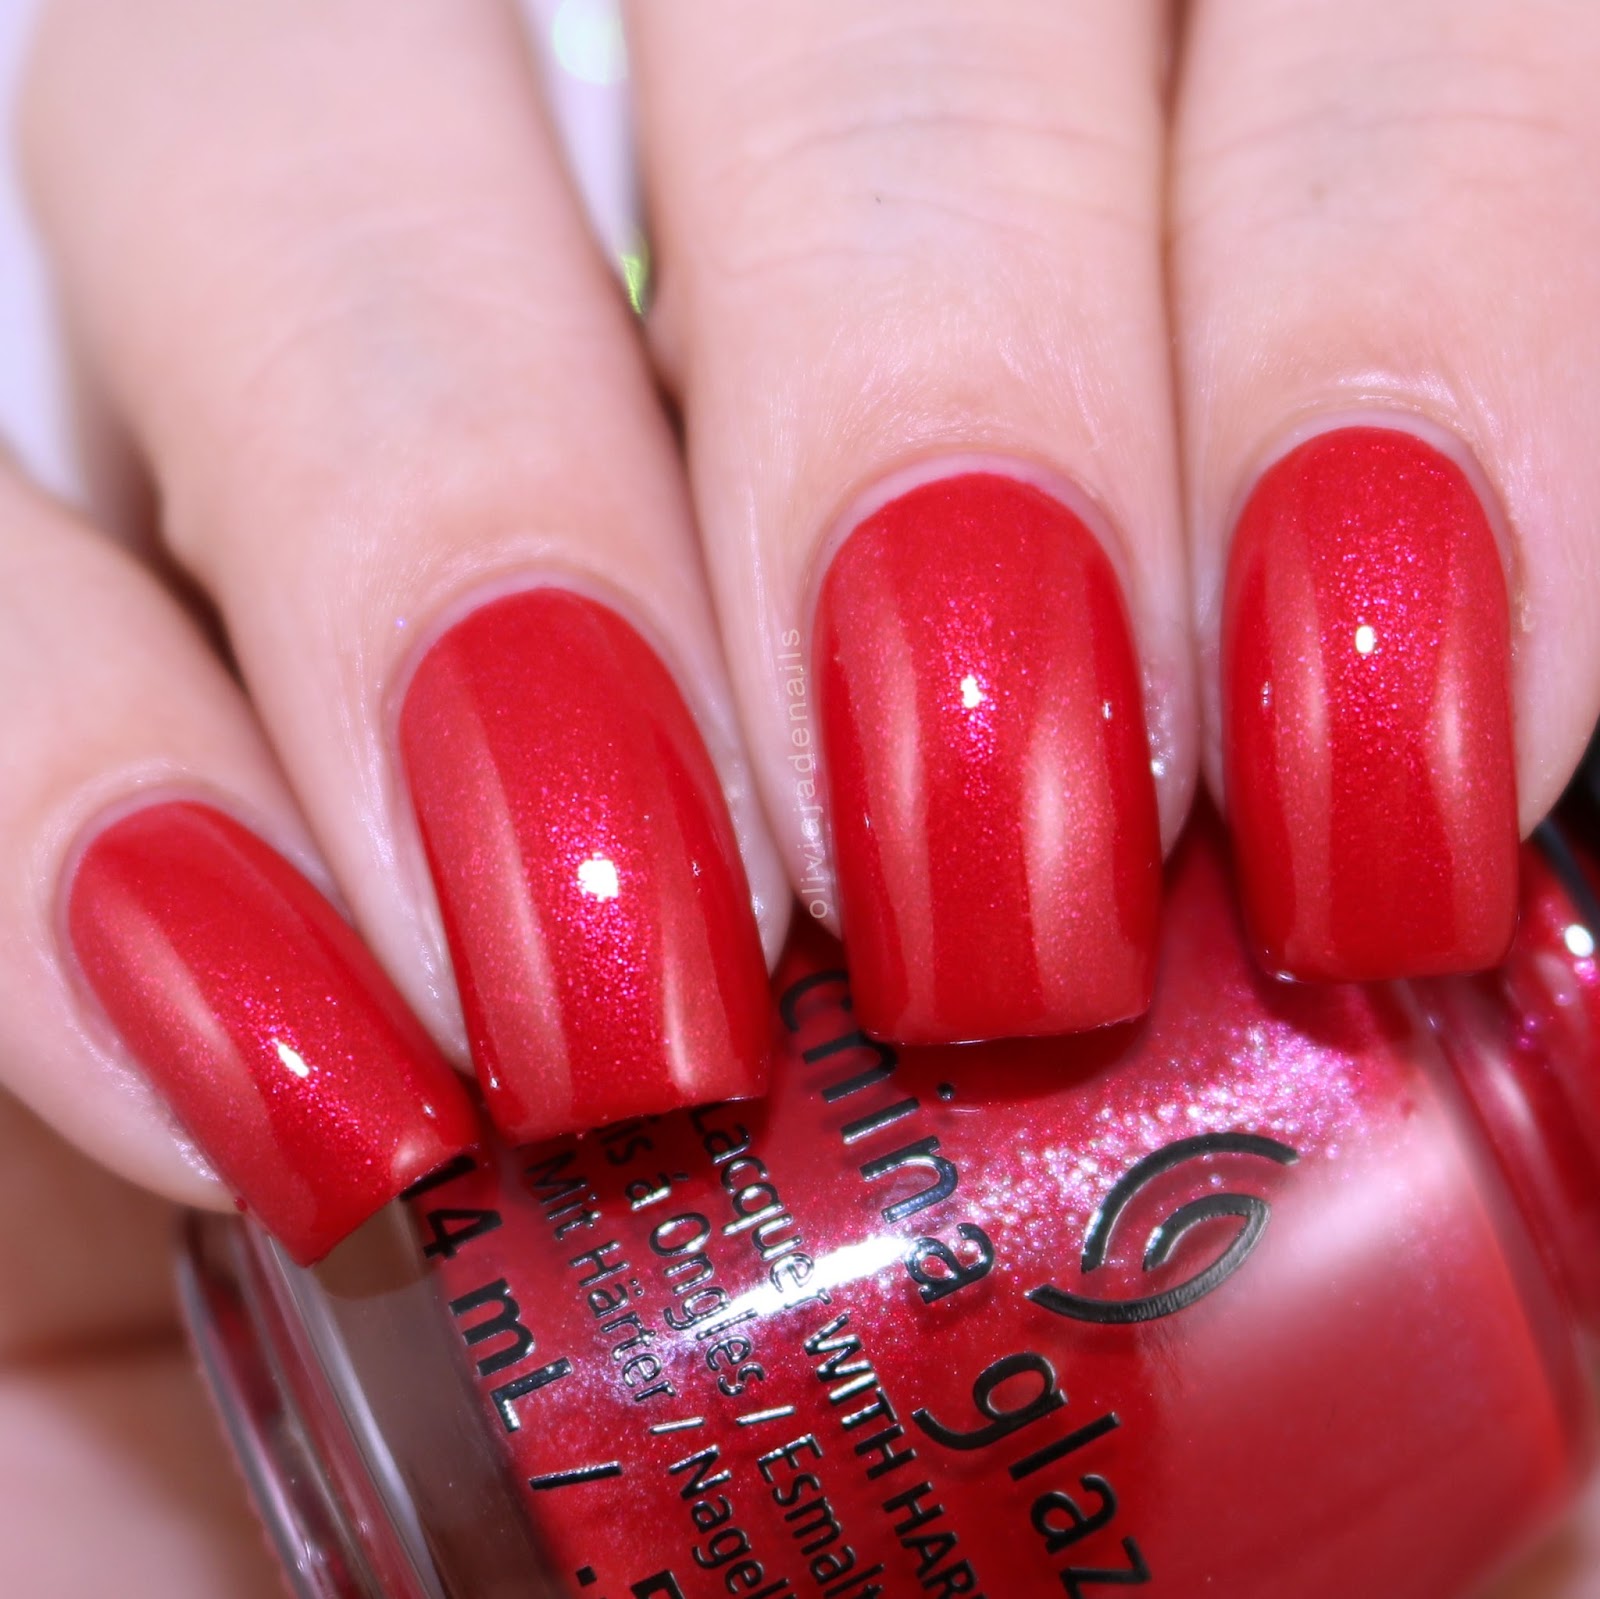 China Glaze Y'all Red-y For This? swatched by Olivia Jade Nails.